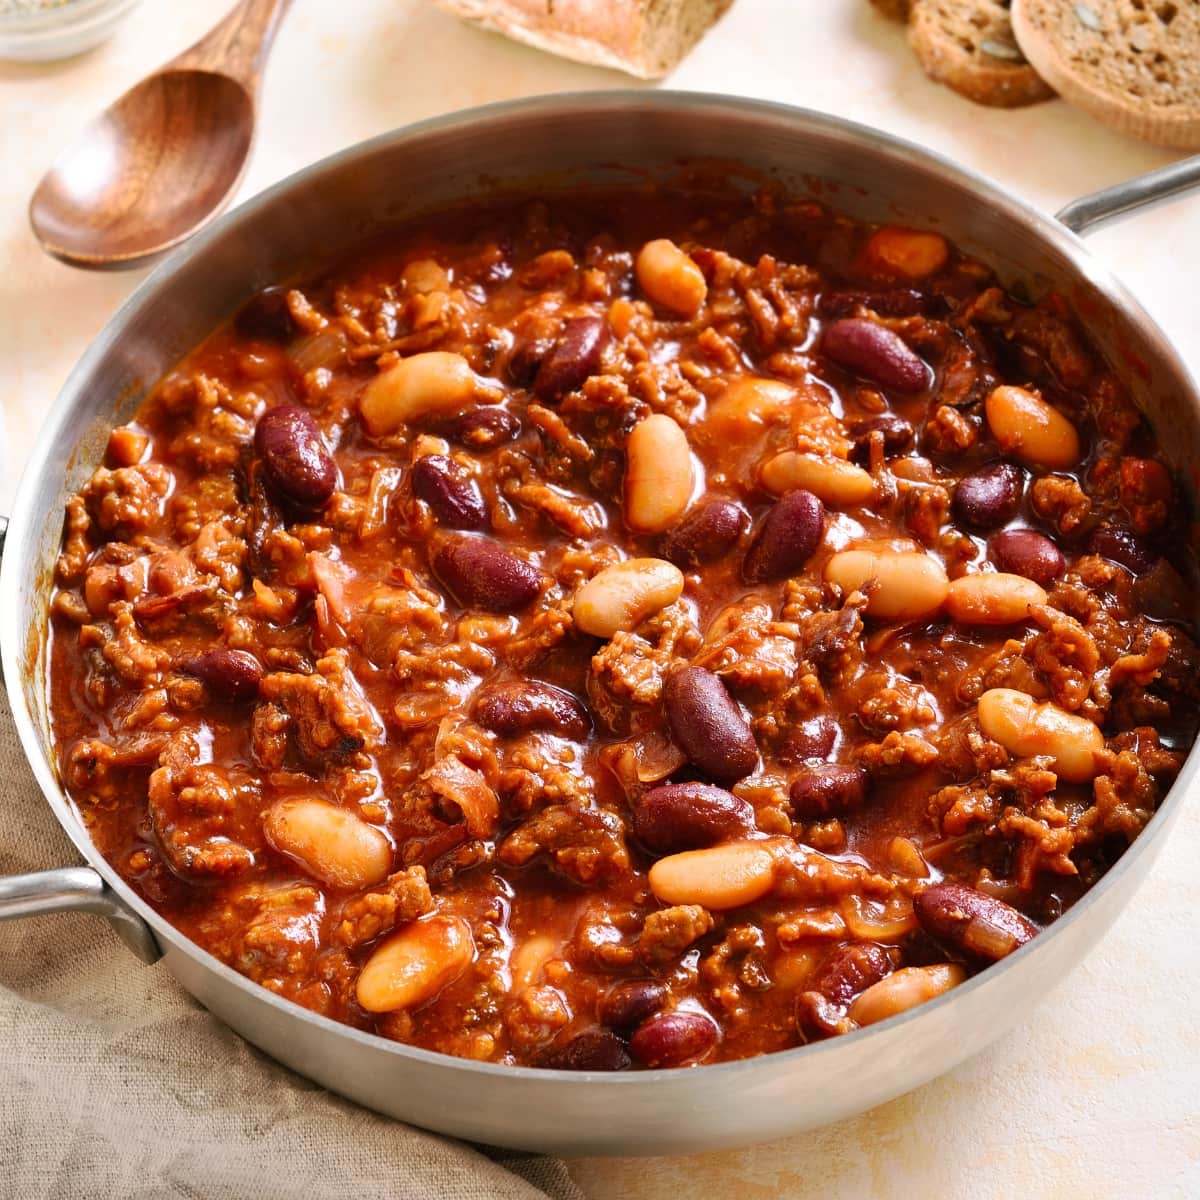 New Cooked Cowboy Beans in a Pot